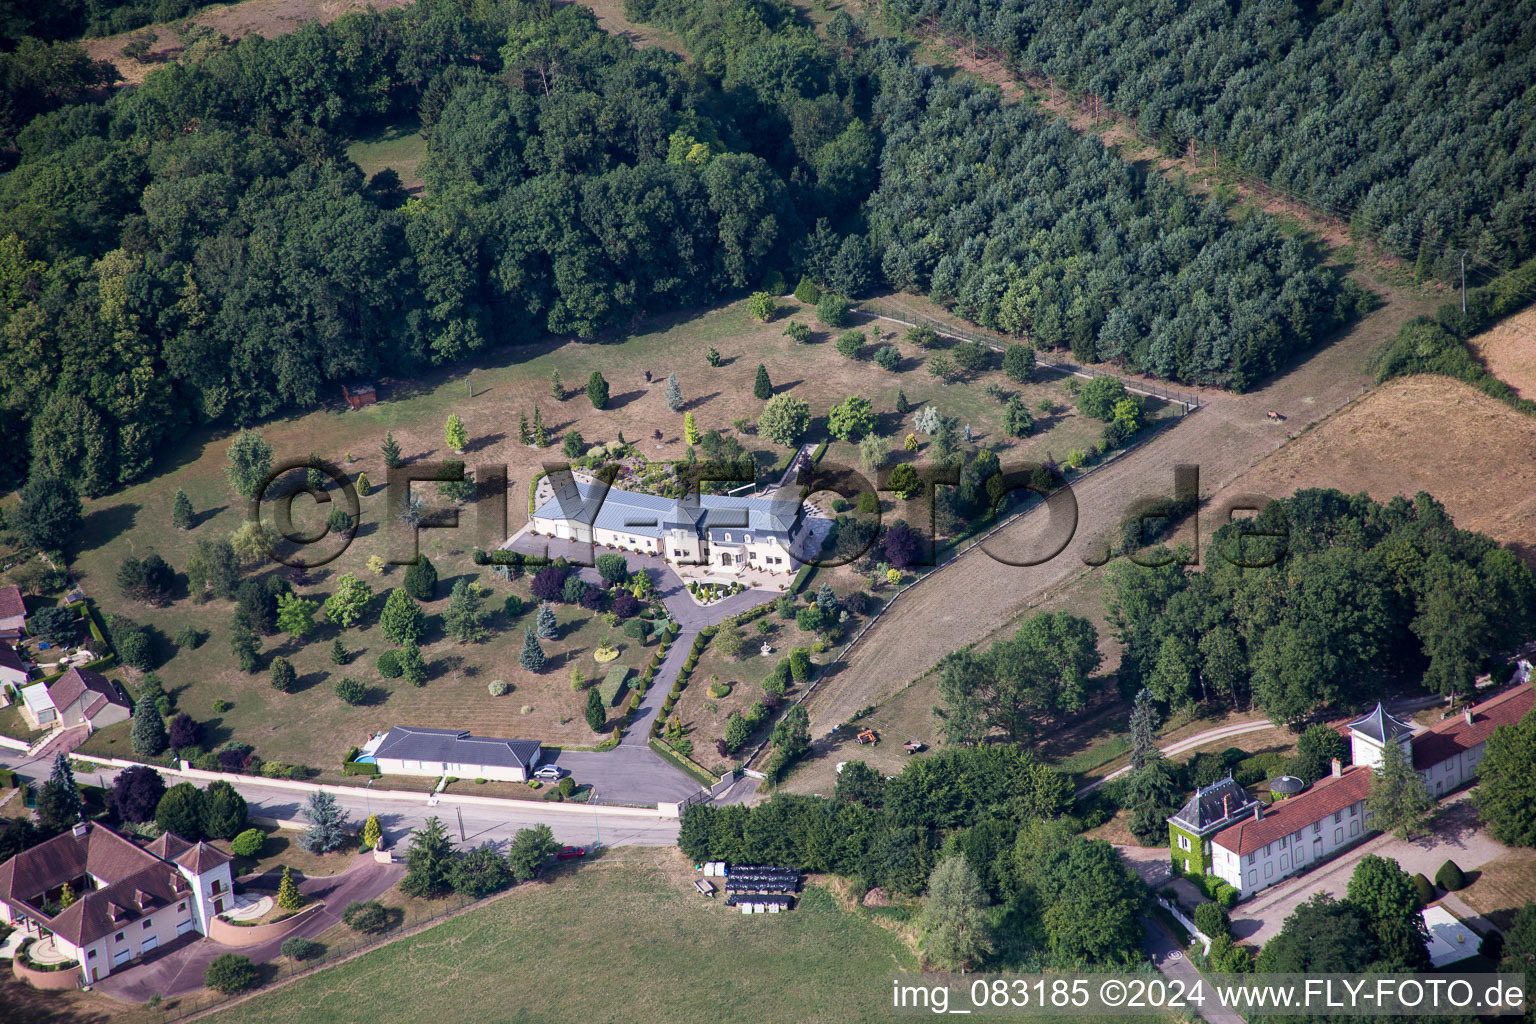 Aerial view of Palace near Luneville in Grand Est, France